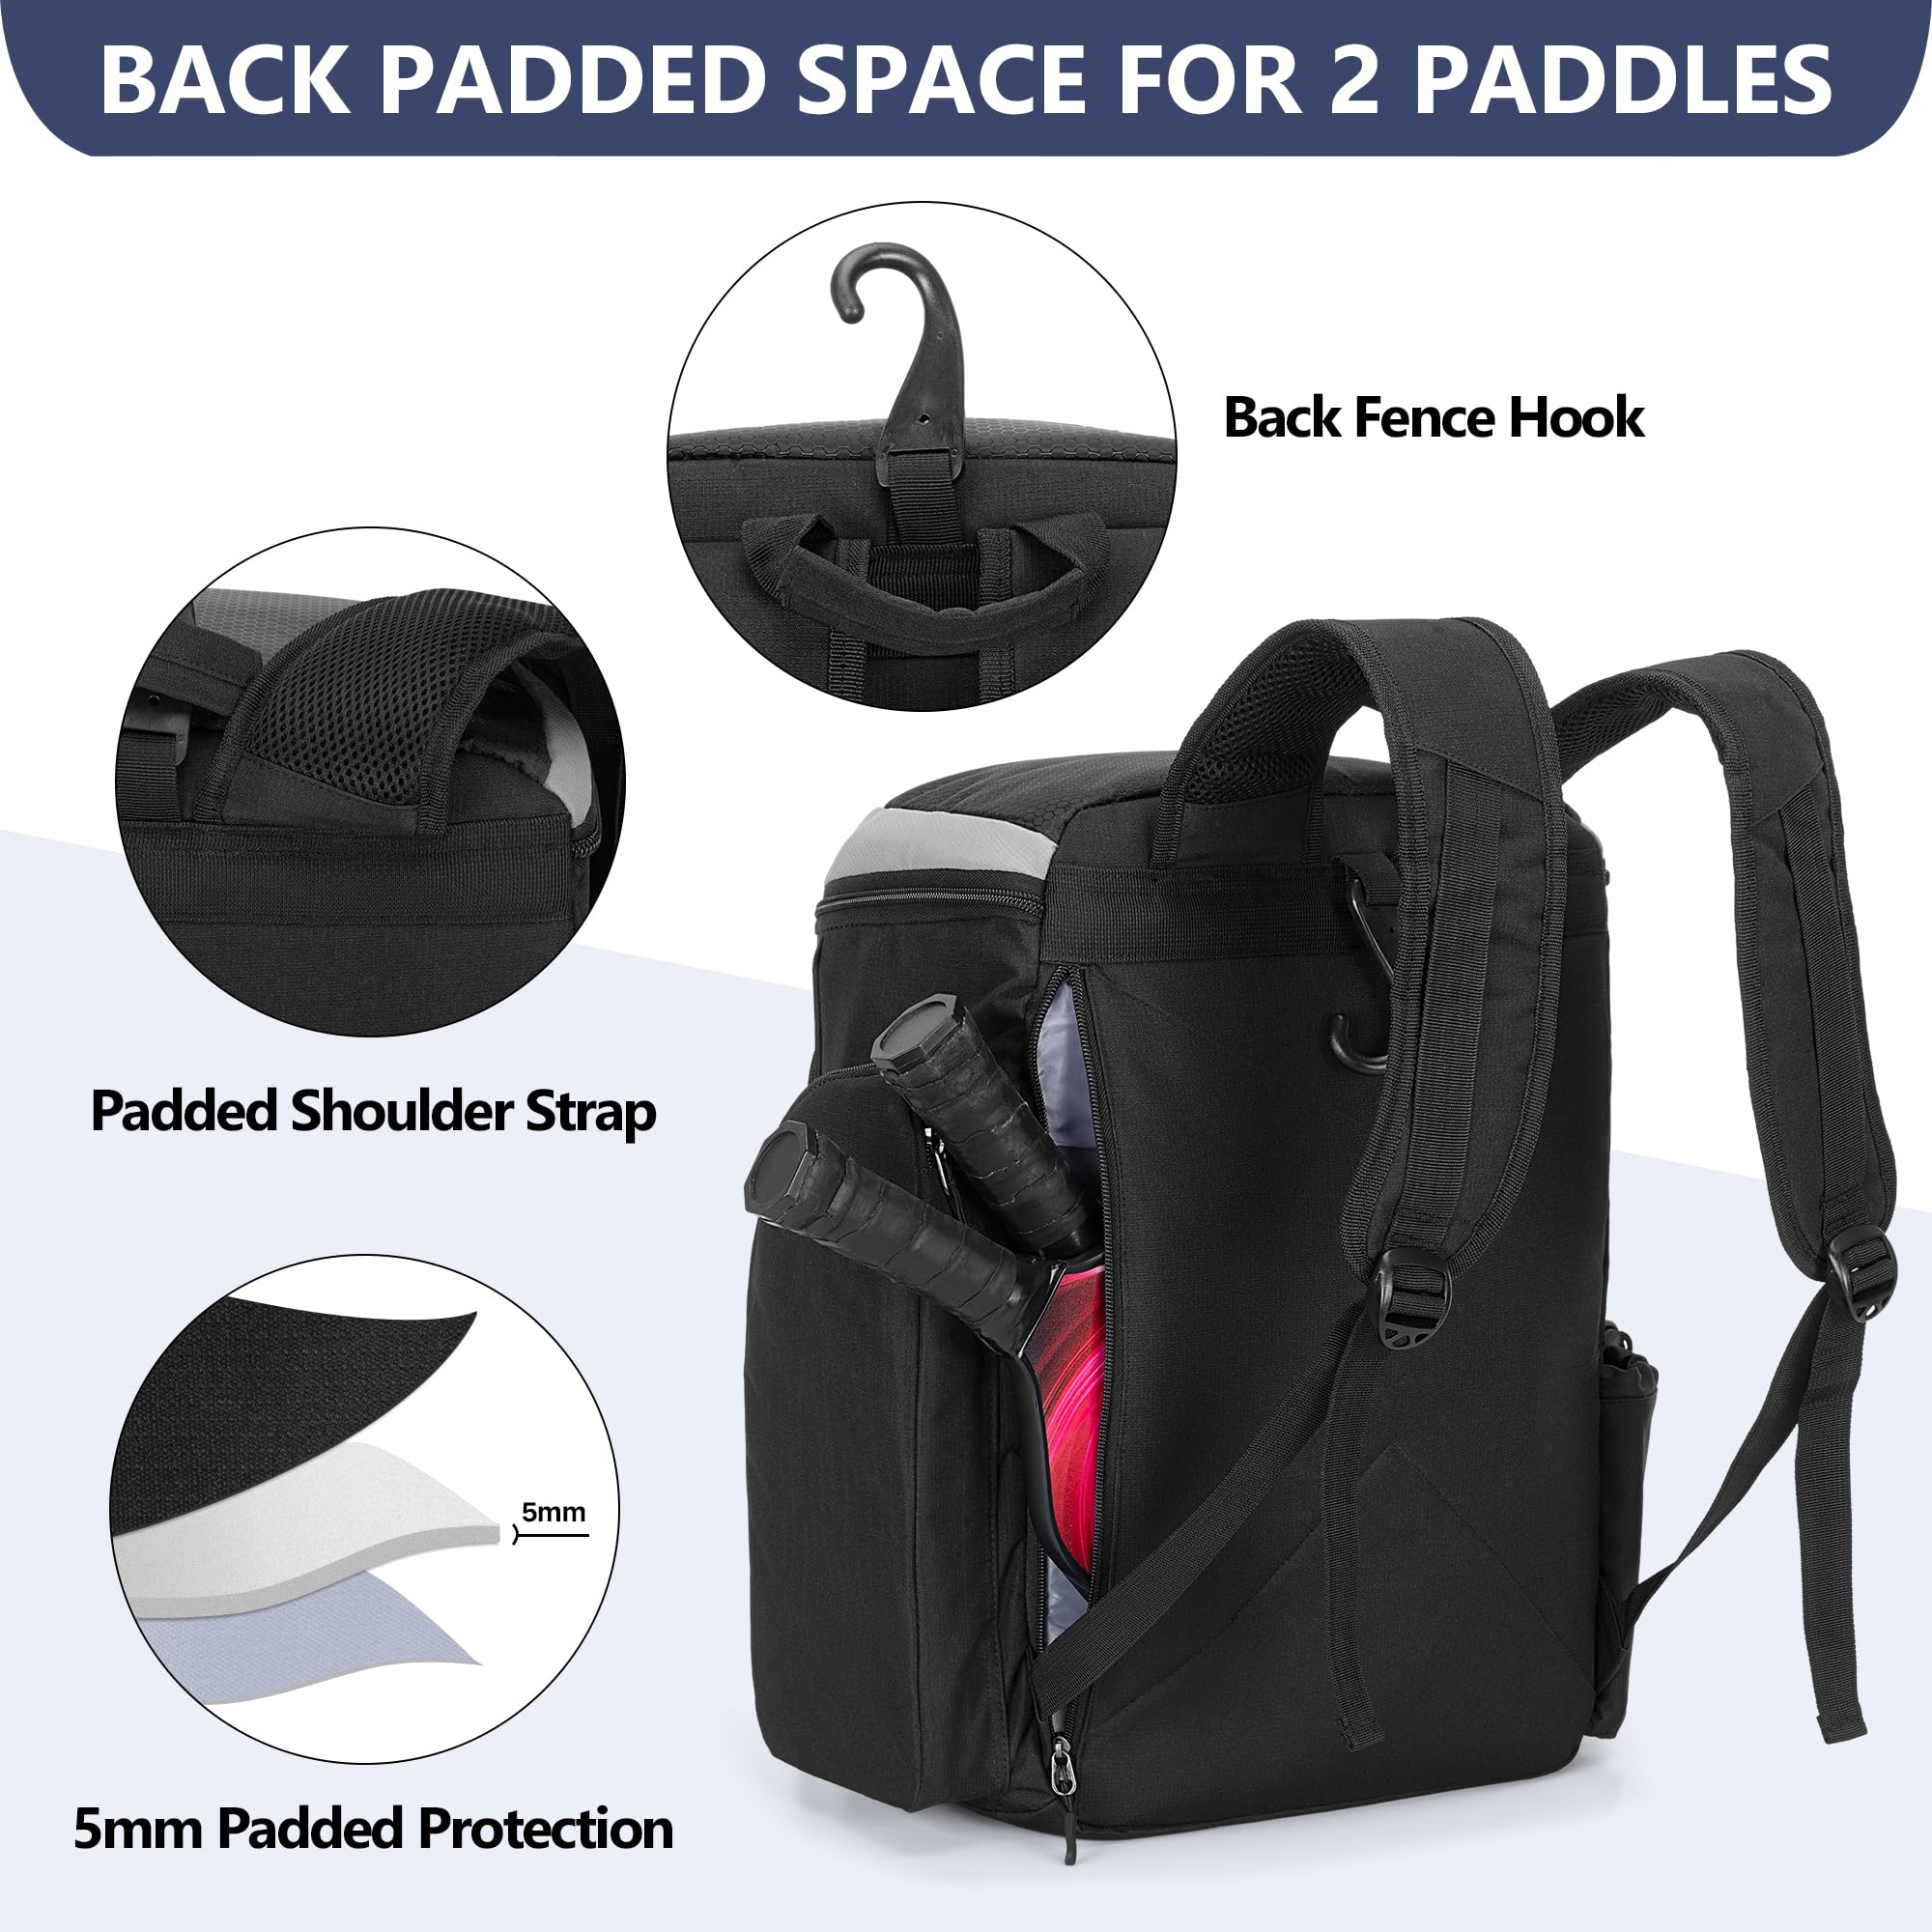 GOBUROS Pickleball Paddle Bag Backpack for 4 Rackets with Fence Hook, Pickleball Equipment Bag with Shoe Compartment for Men Women, Grey, Bag Only